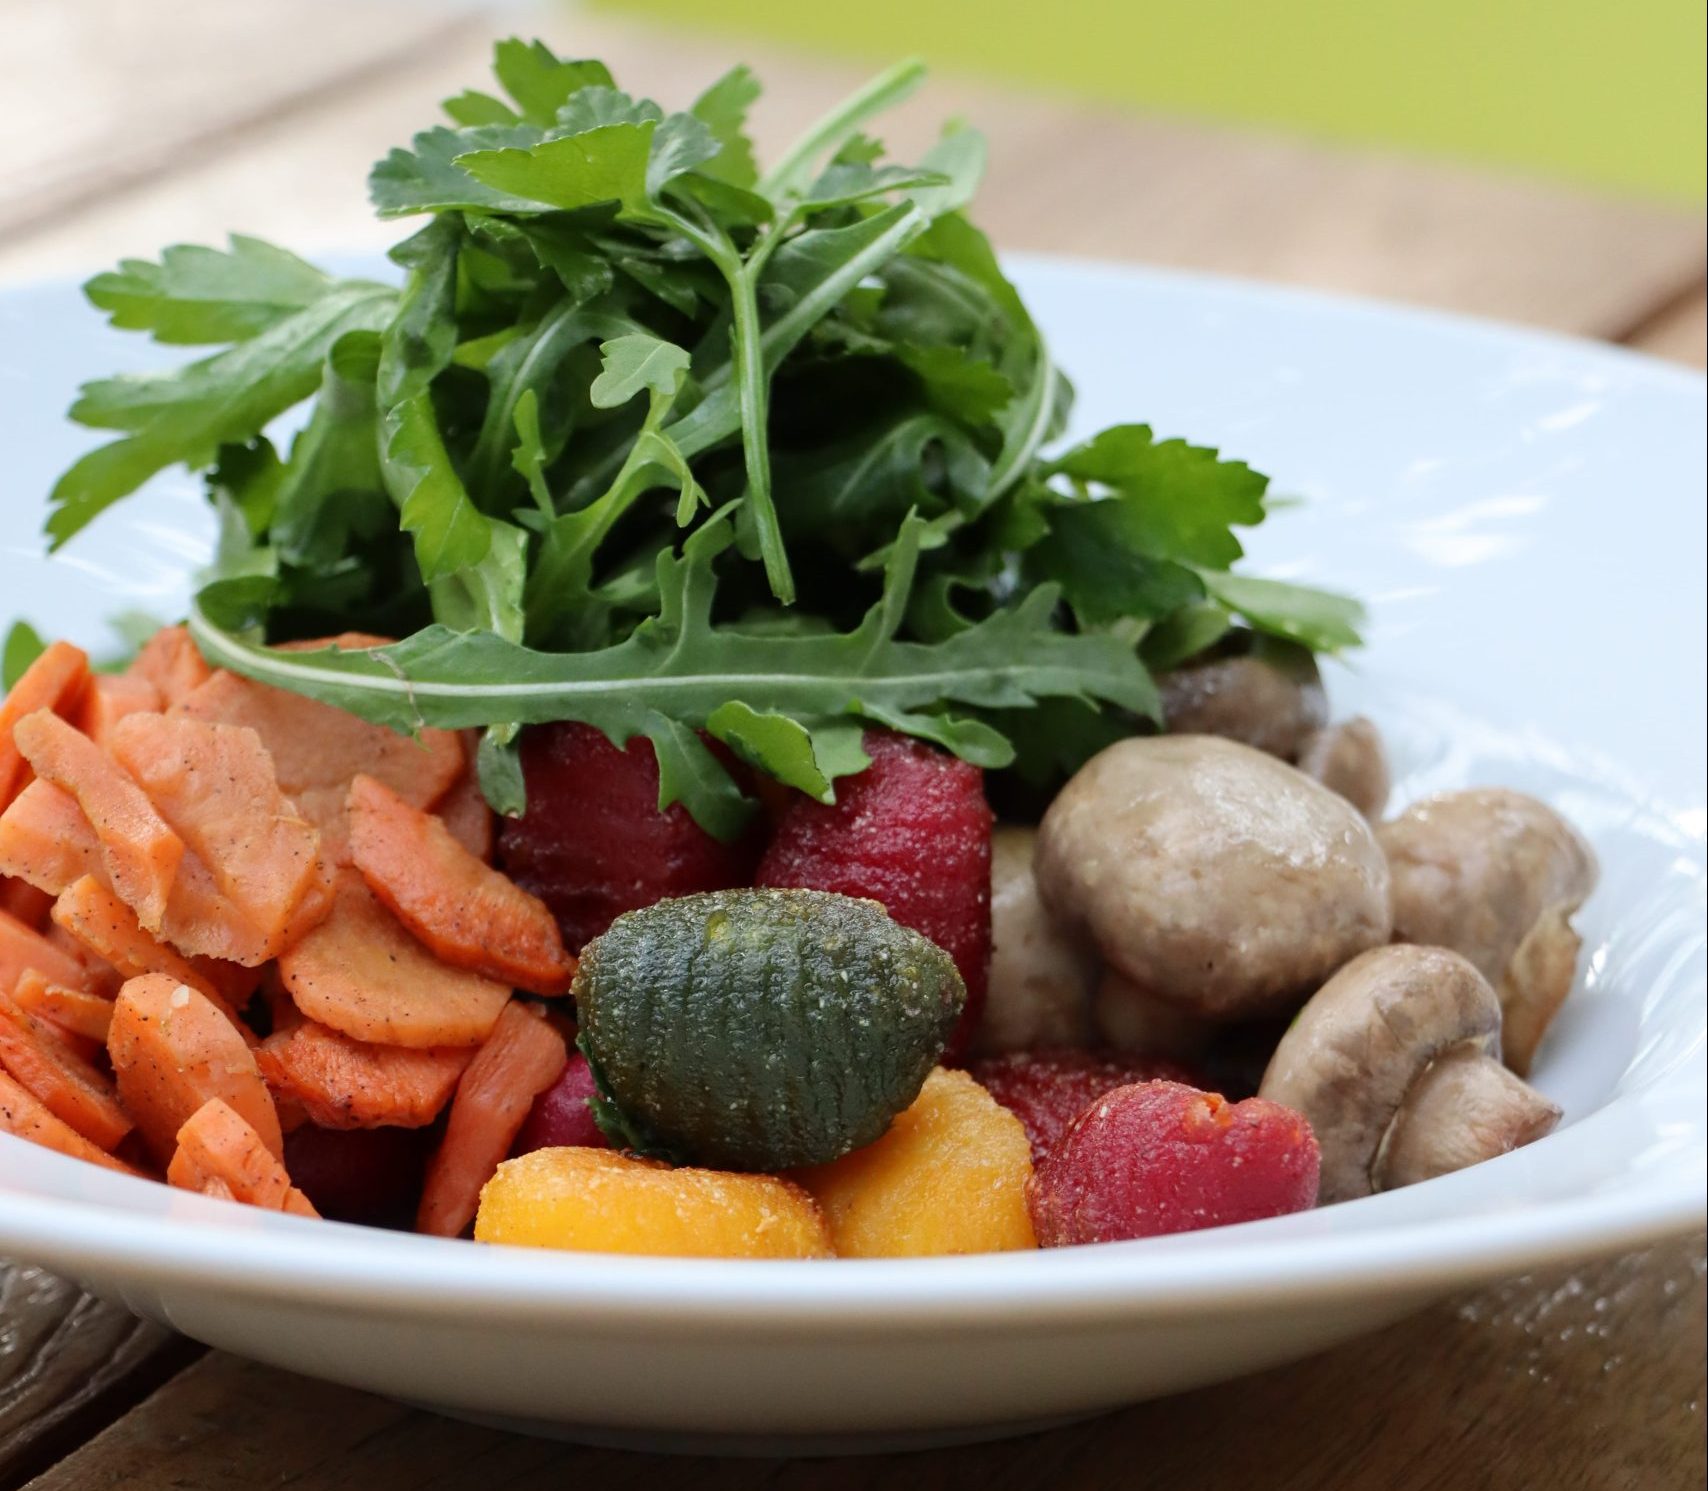 Gnocchi Bowl with beetroot-spinach-gnocchi, carrots, mushrooms, wild garlic and rocket